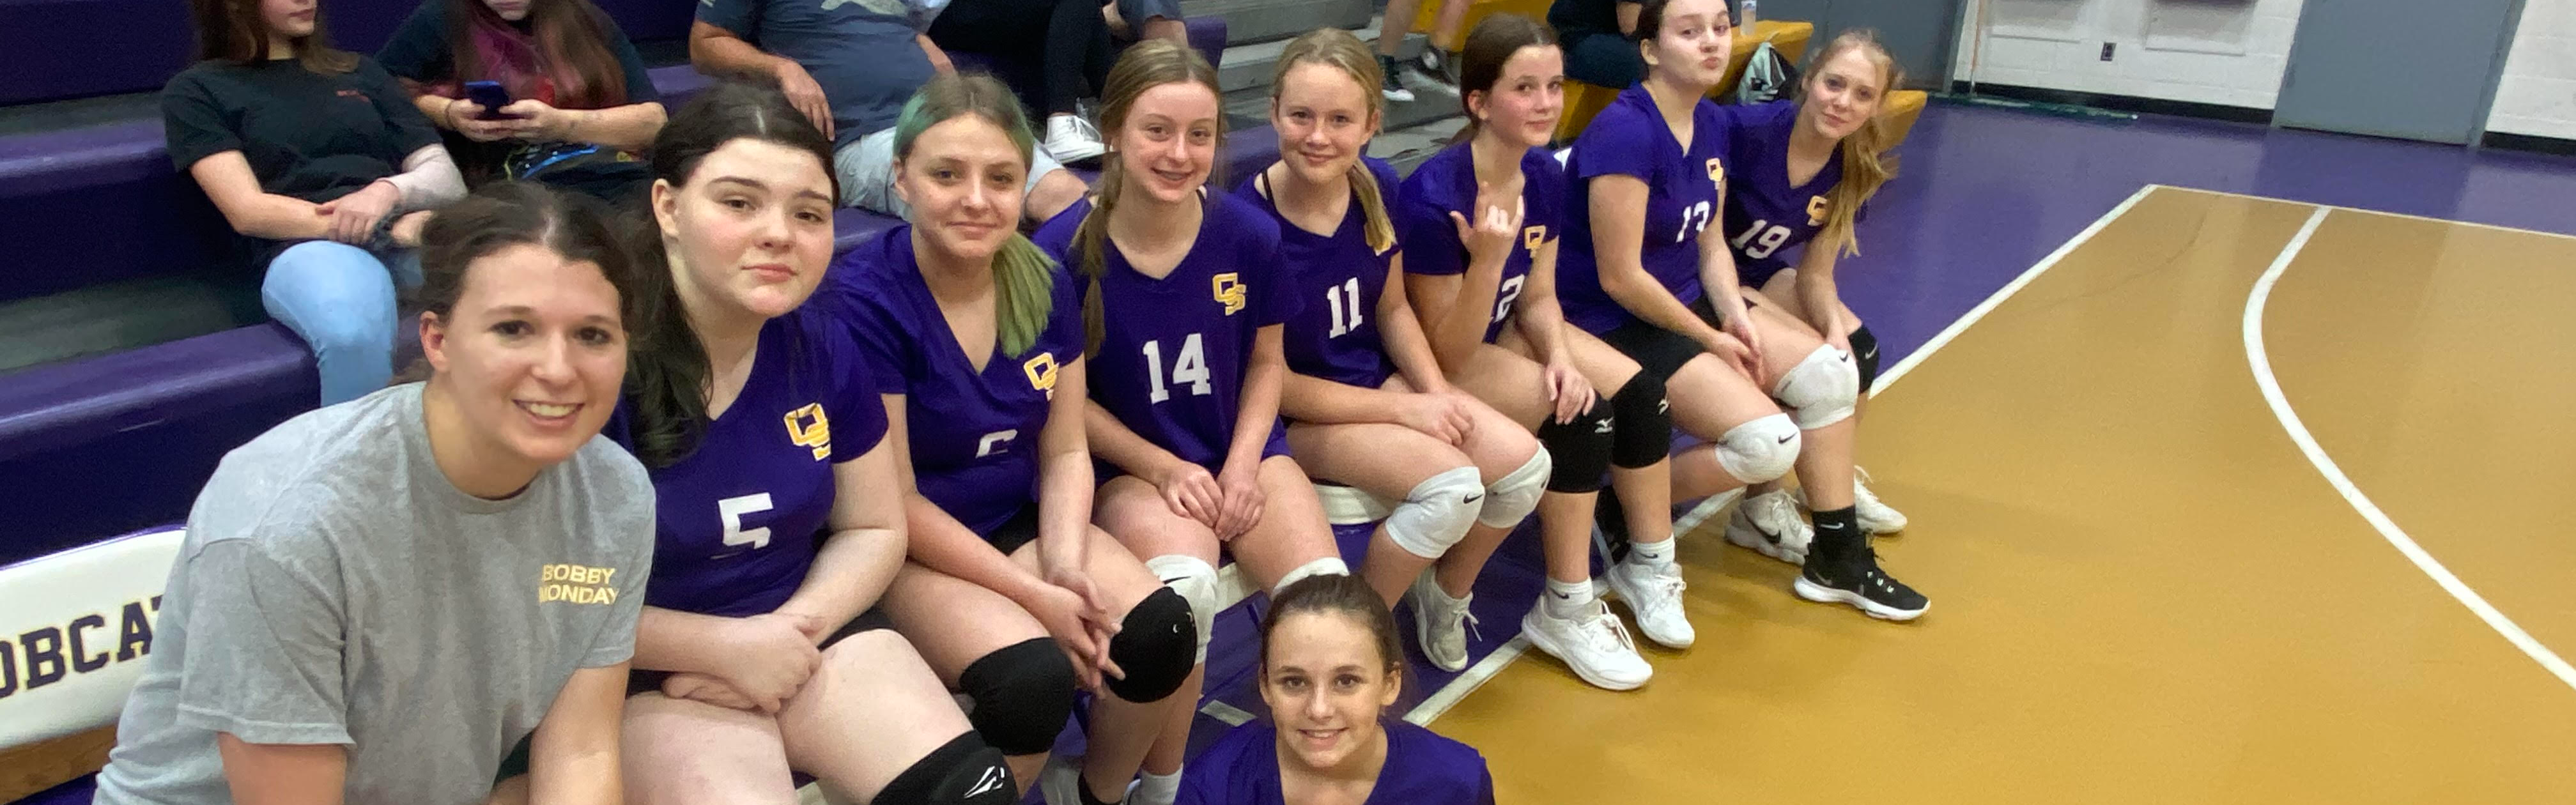 OSMS Volleyball team